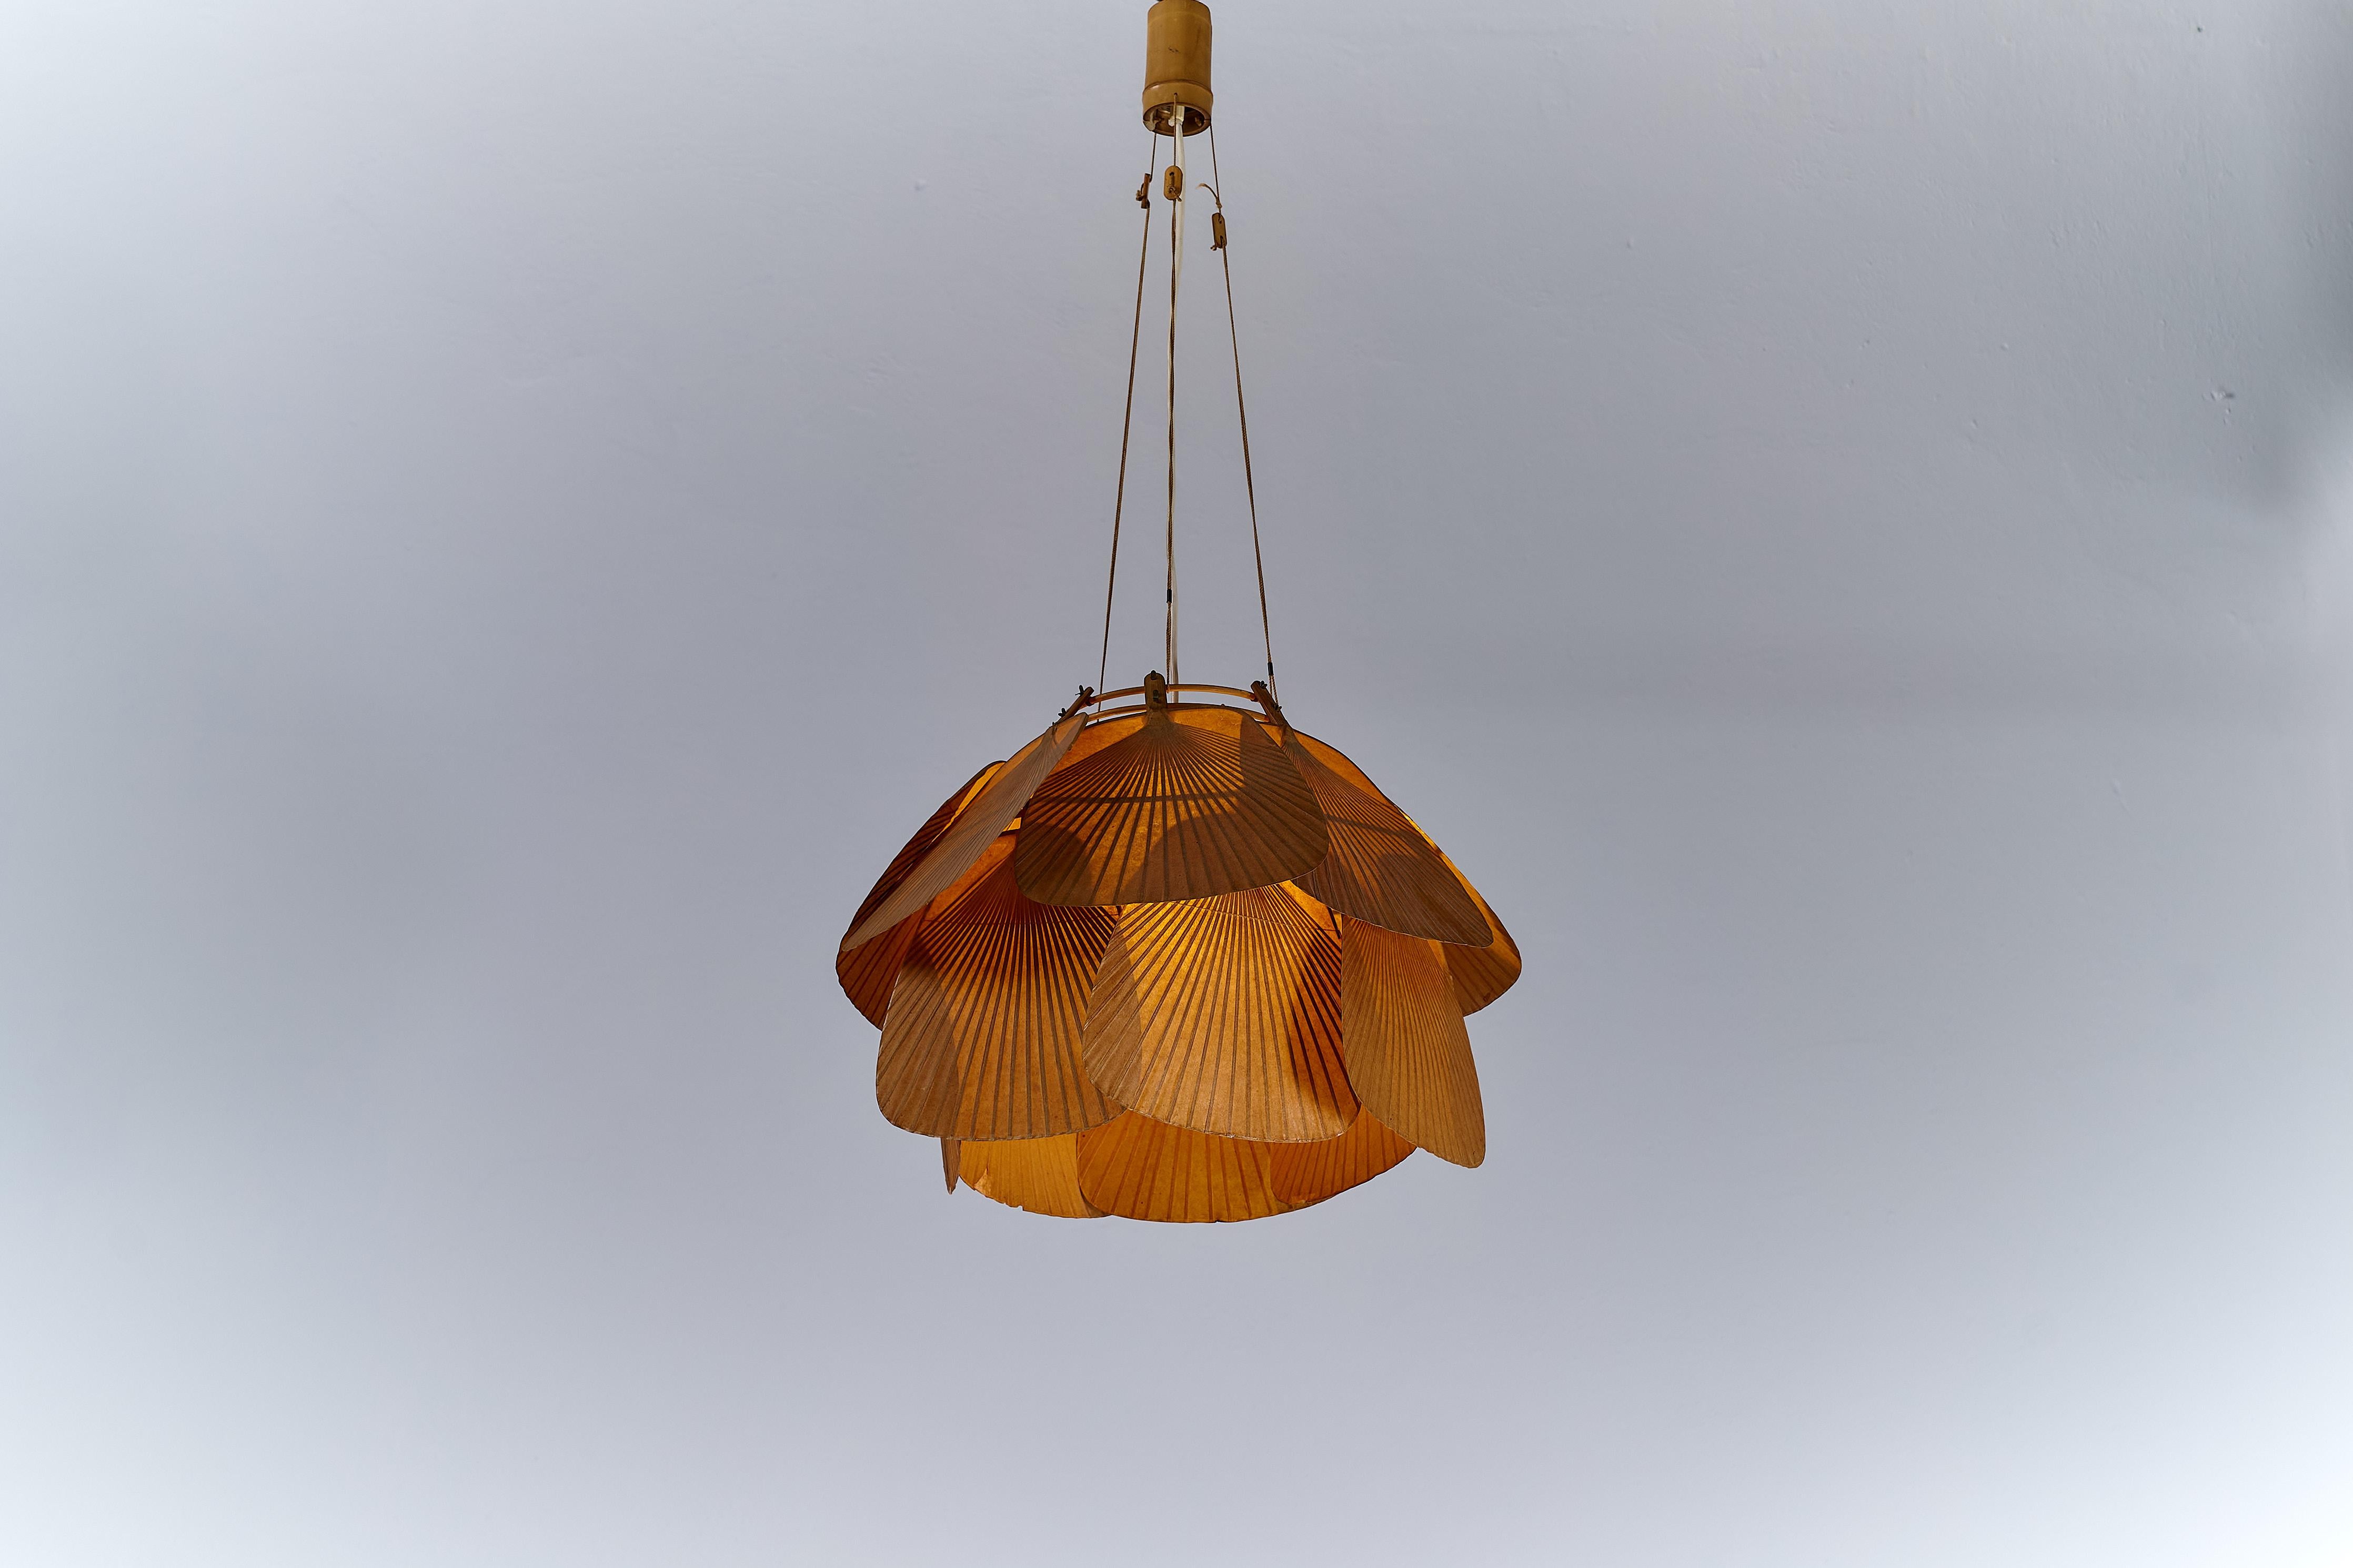 A striking blend of tradition and avant-garde design, the Uchiwa pendant lamp by Ingo Maurer for Design M exemplifies the artistic exploration of the 1970s. Comprising fourteen fans crafted from bamboo and rice paper, this ceiling light radiates an